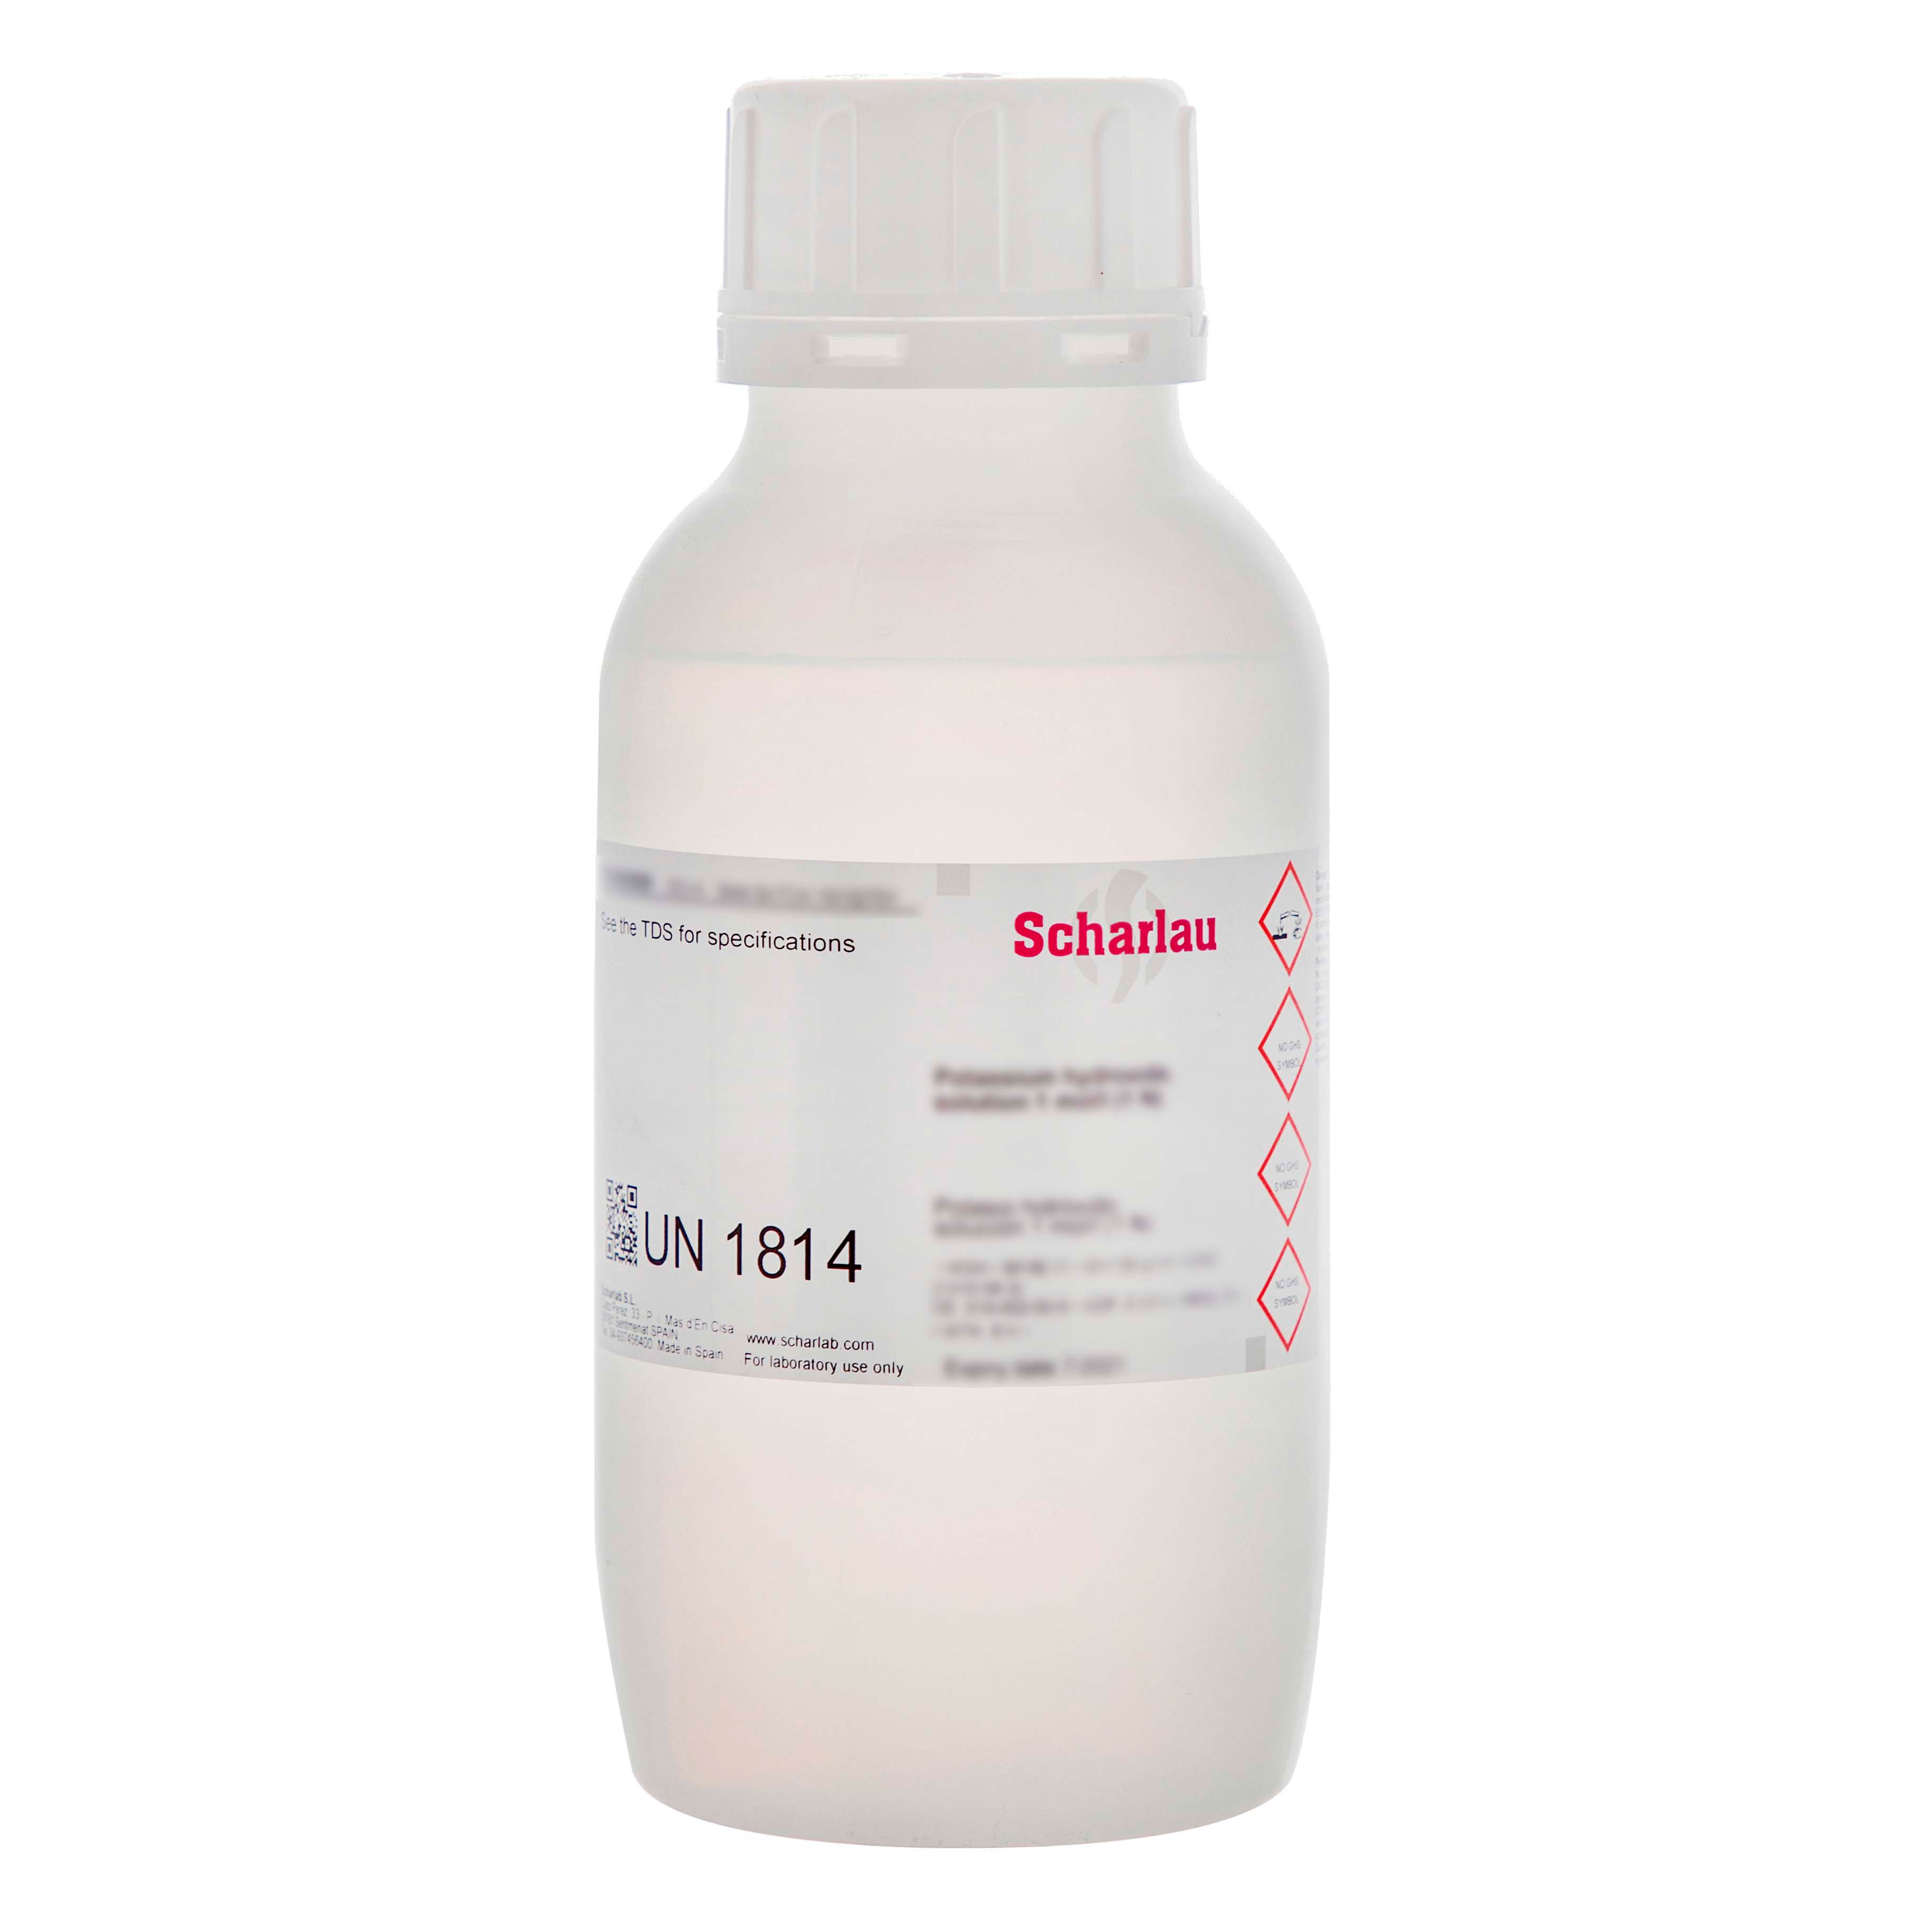 Silicon, standard solution 1000 mg/l Si for AAsS (ammonium hexafluorosilicate in H2O)